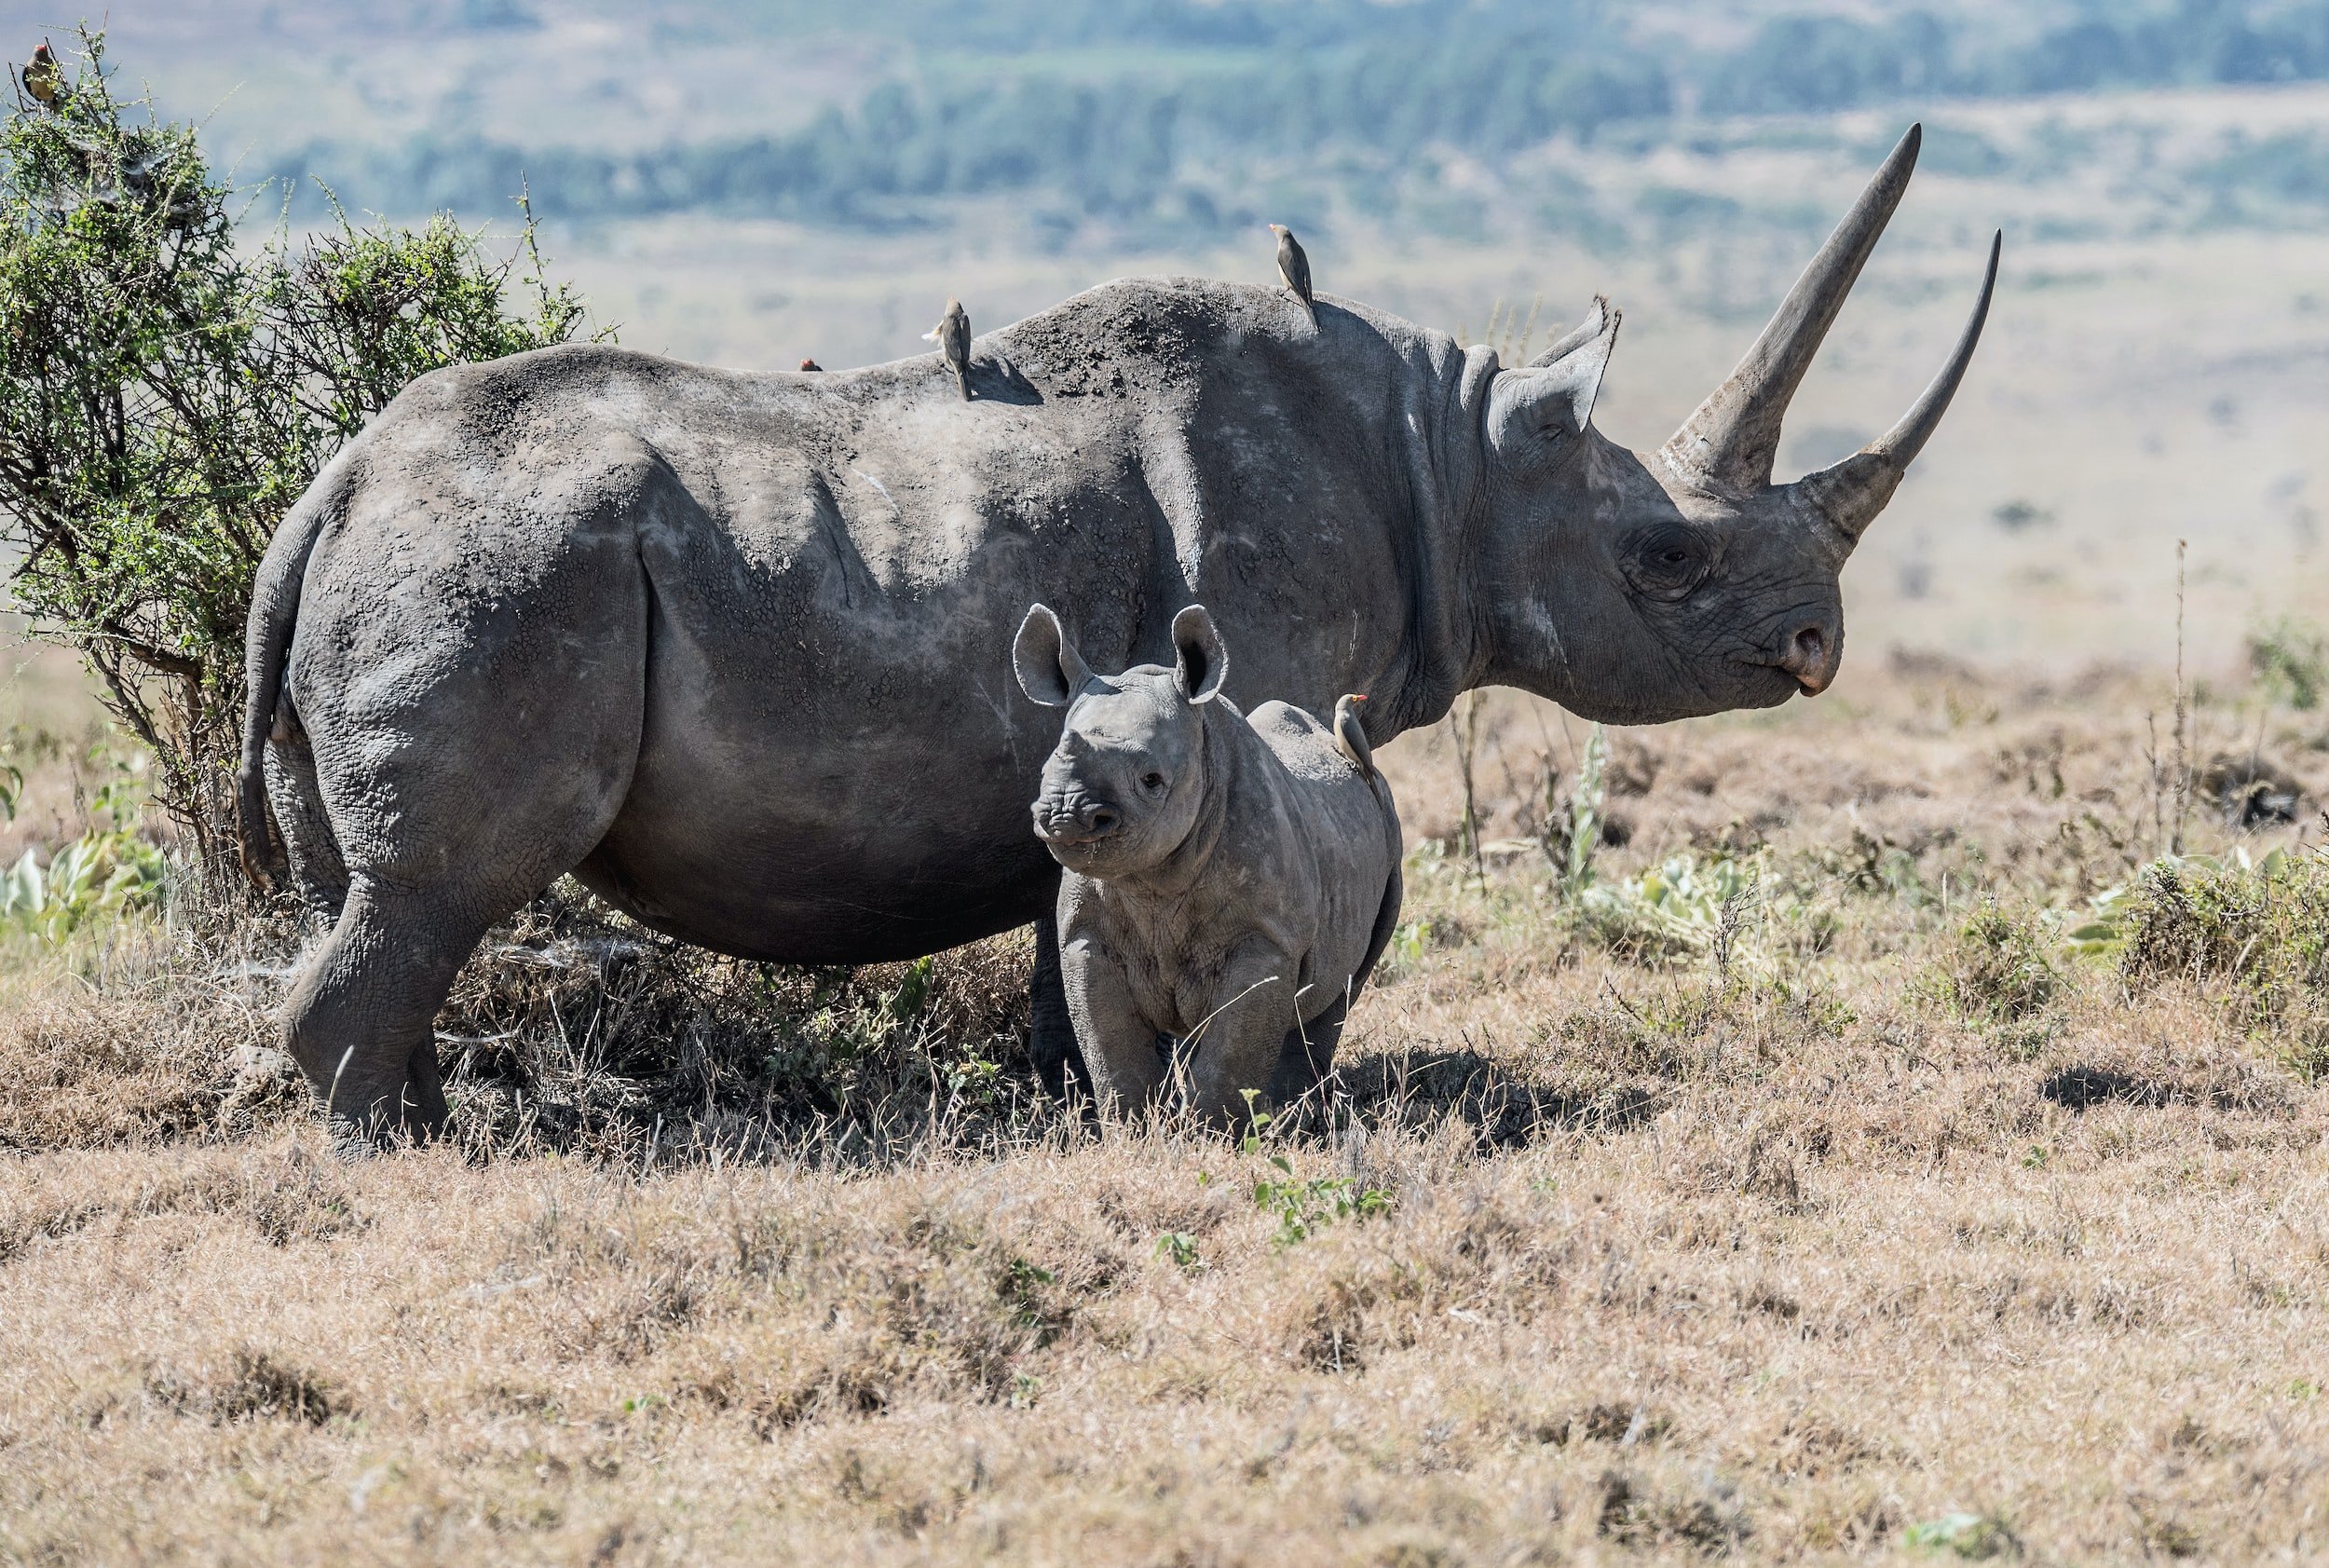 Rhino Poaching Surged 93% in Namibia Last Year—Study Shows Wealth May Be Key to Stopping It